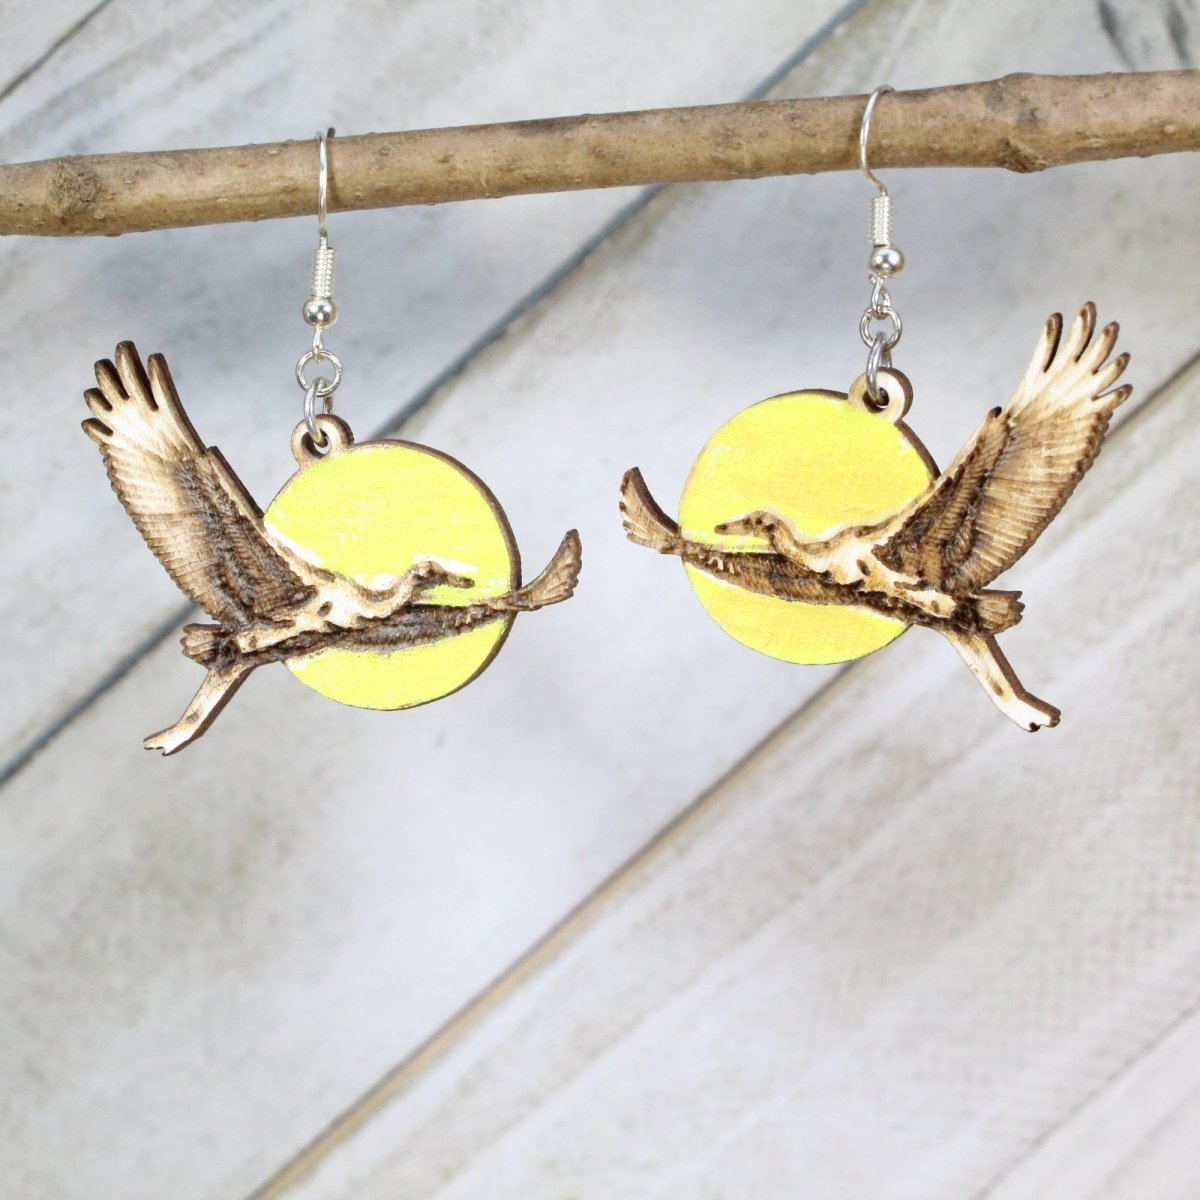 Whoop It Up! - Whooping Crane Wooden Dangle Earrings - - Cate's Concepts, LLC